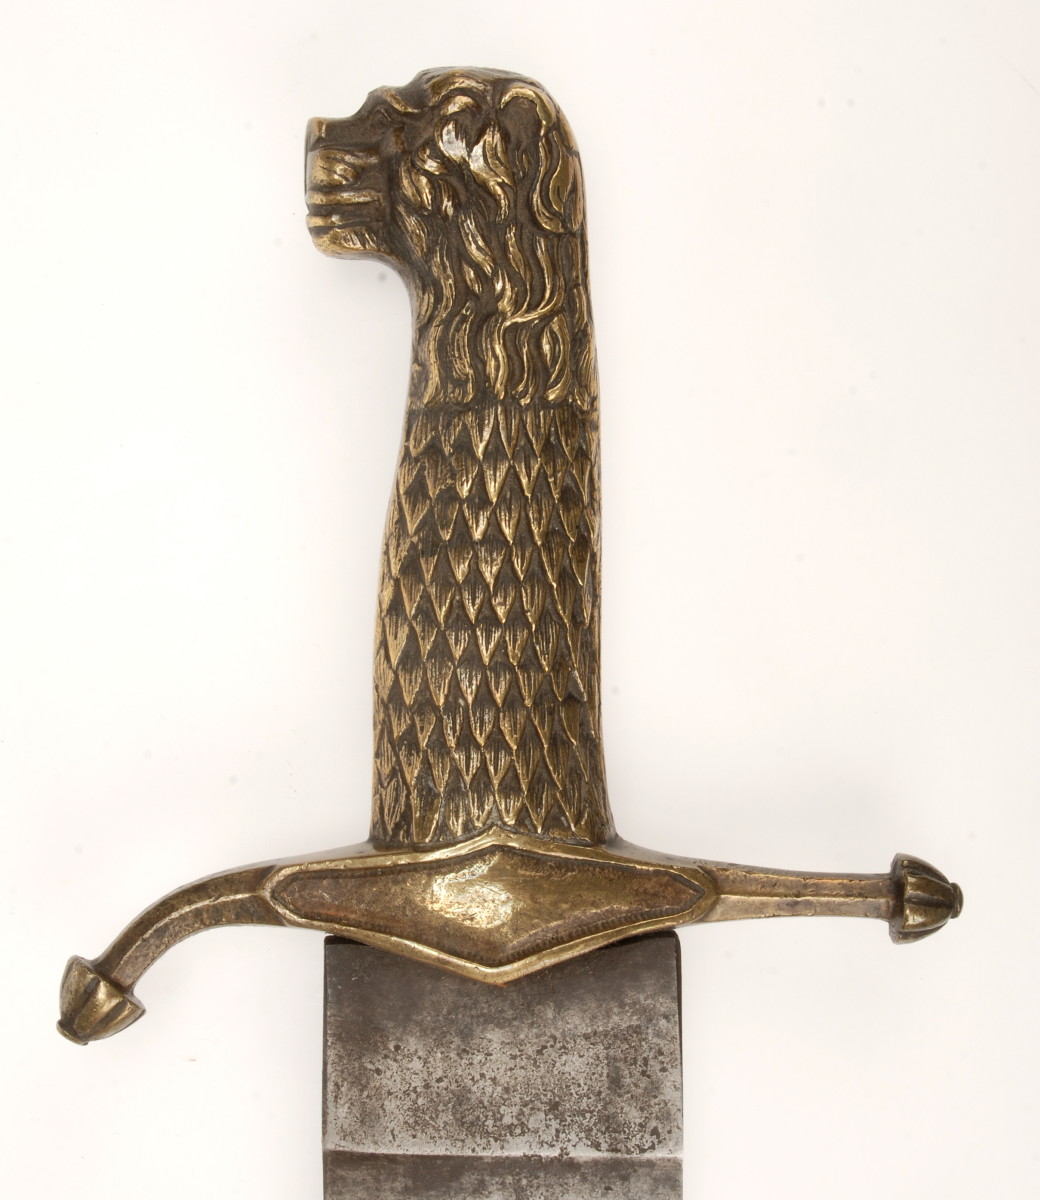 The brass hilt of the Infantry machete sports a lion’s head pommel. The center diamond shaped area of the cross guard can be found with embossed unit numbers, initials or branch insignia. Similar machetes were issued to some non-military, government agencies. The cross guard should be straight, the bent arm on this one is the result of a blow in service. The blade on this example is unmarked.